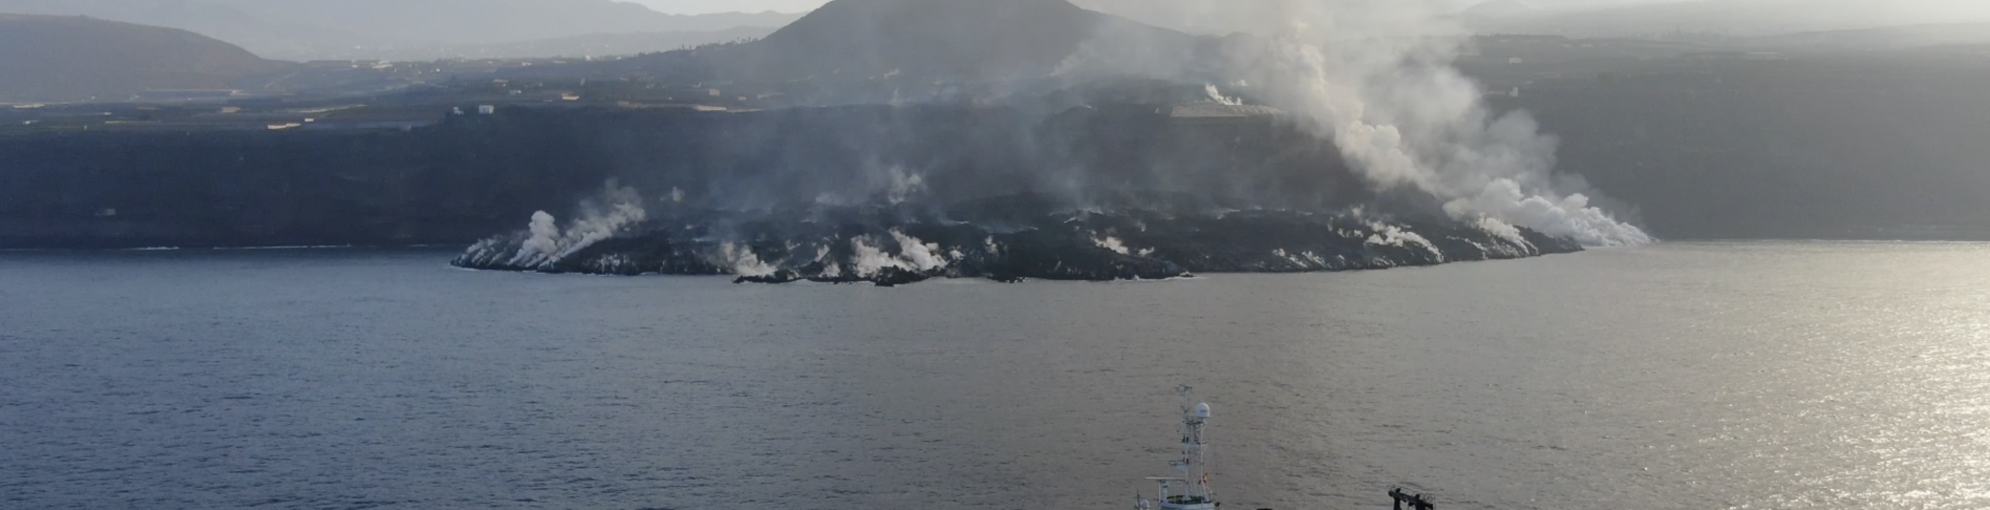 CoSV webinar series: Physical-chemical perturbations and biological response over the two most recent eruptions registered in the Canary Islands: Tagoro submarine volcano (El Hierro) and Cumbre Vieja (La Palma)